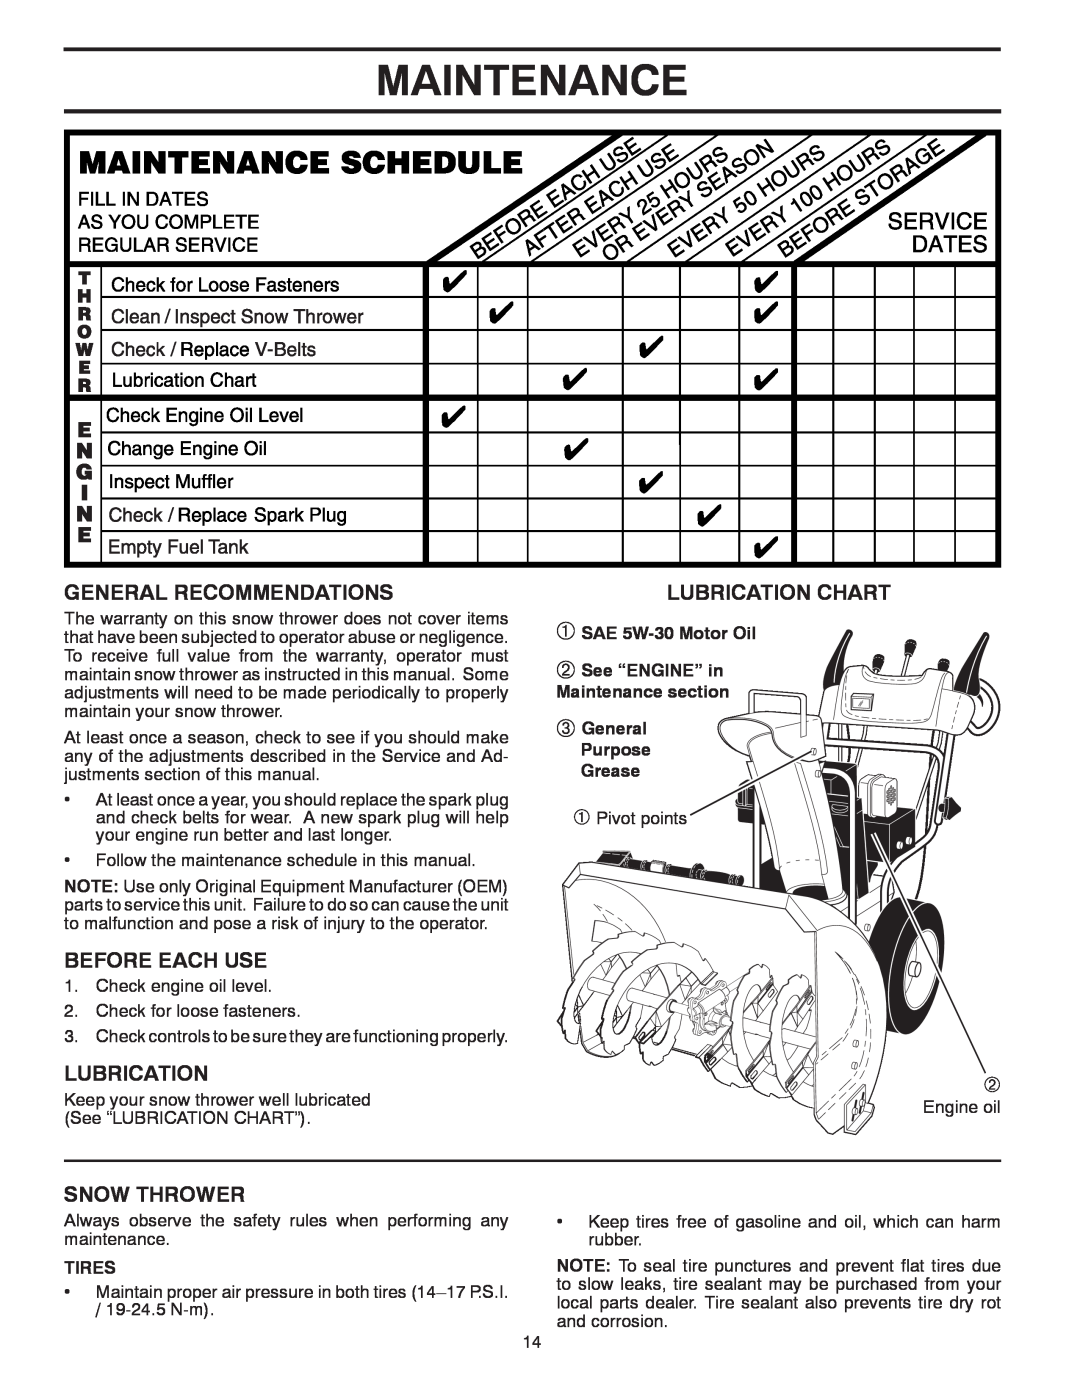 Poulan 96192002001 Maintenance, General Recommendations, Before Each Use, Snow Thrower, Lubrication Chart, Tires 